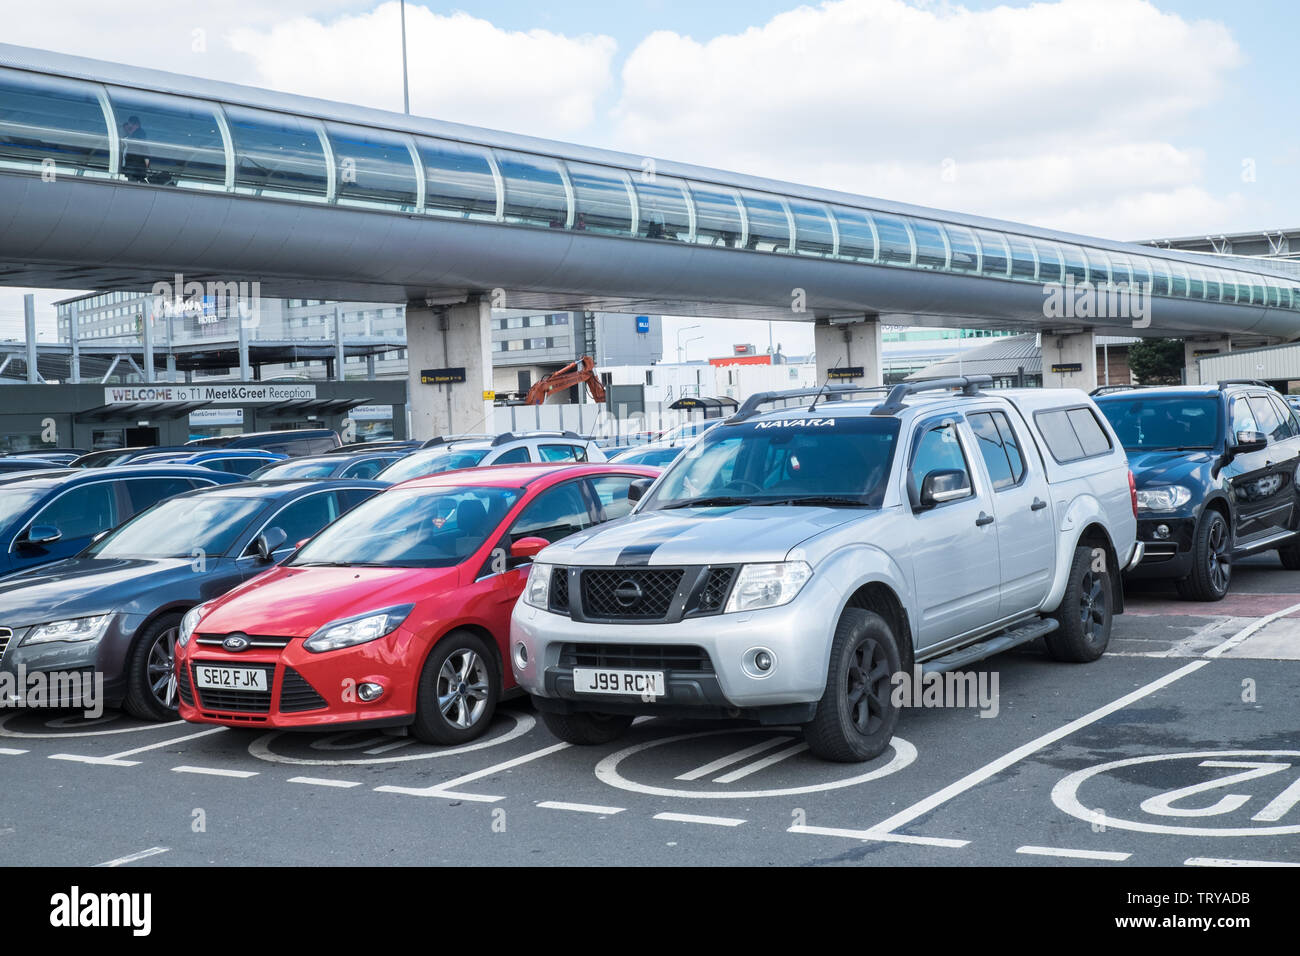 Car Park,parking,charges,airport,Manchester Airport,Manchester,northern,city,England,Britain,British,GB,UK,Europe, Stock Photo